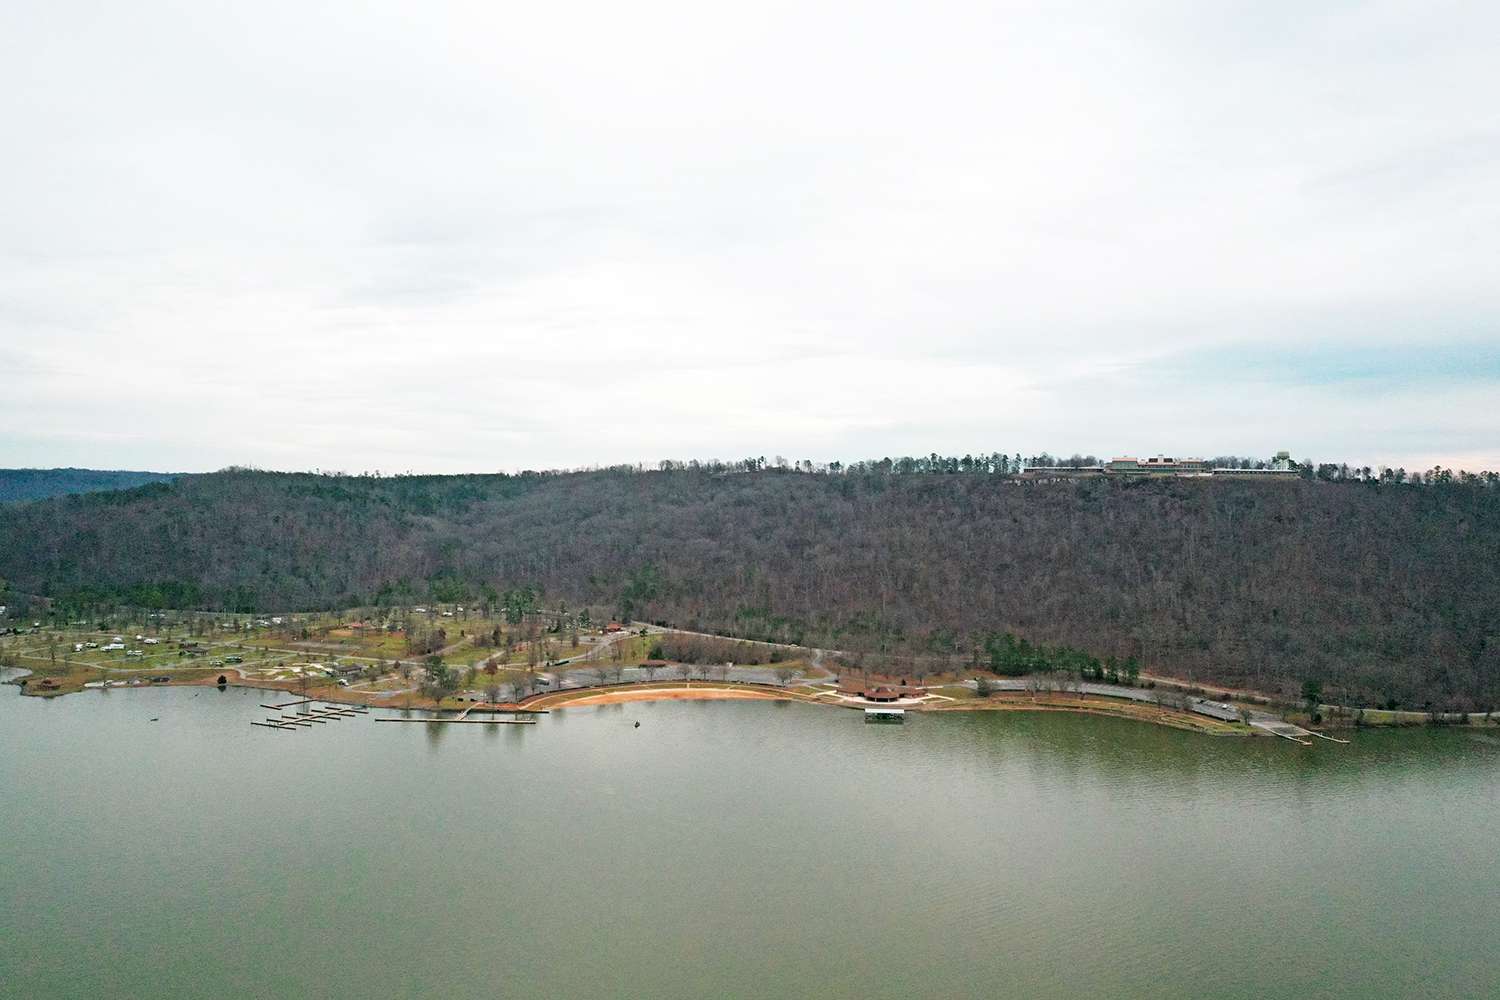 You can see the main facility of the State Park at the top of the hill, and the RV park and boat ramp at the base of the hill. 